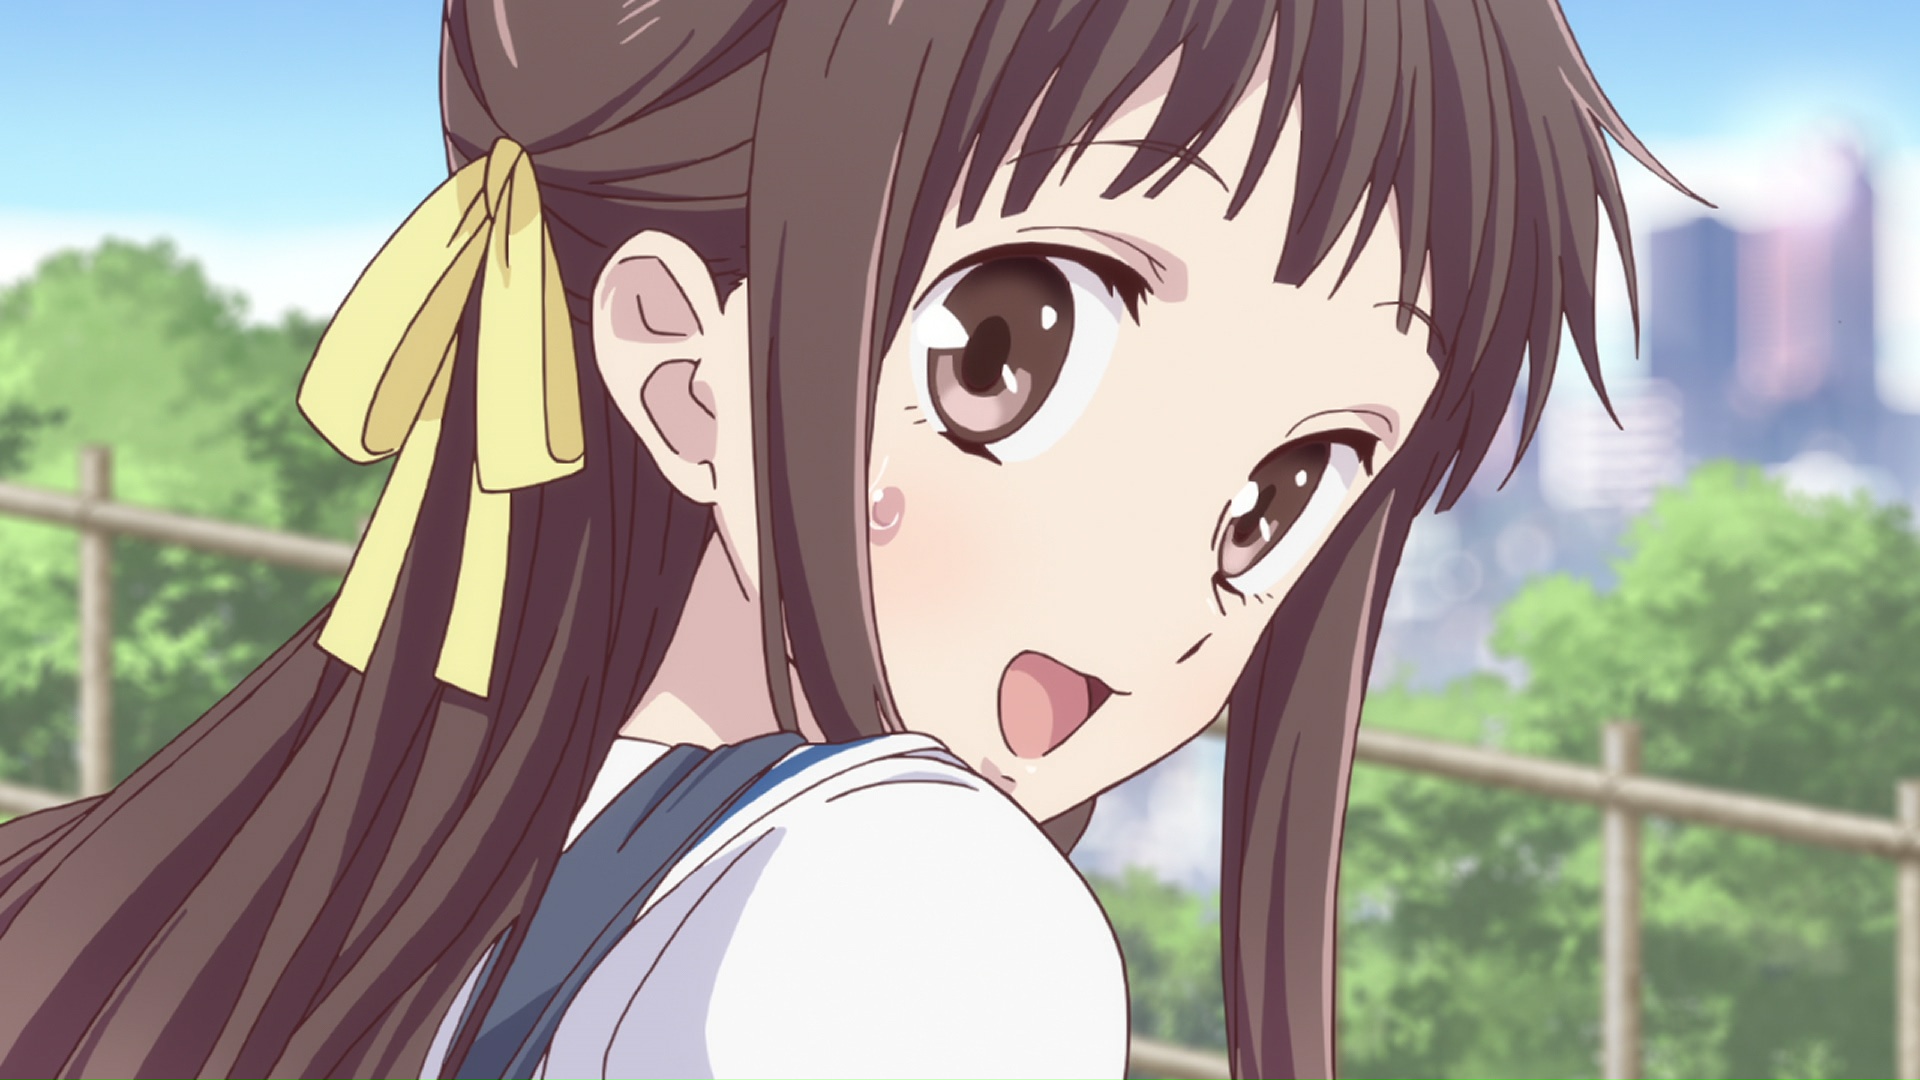 See You After School – Fruits Basket (2019) Episode 1 Review